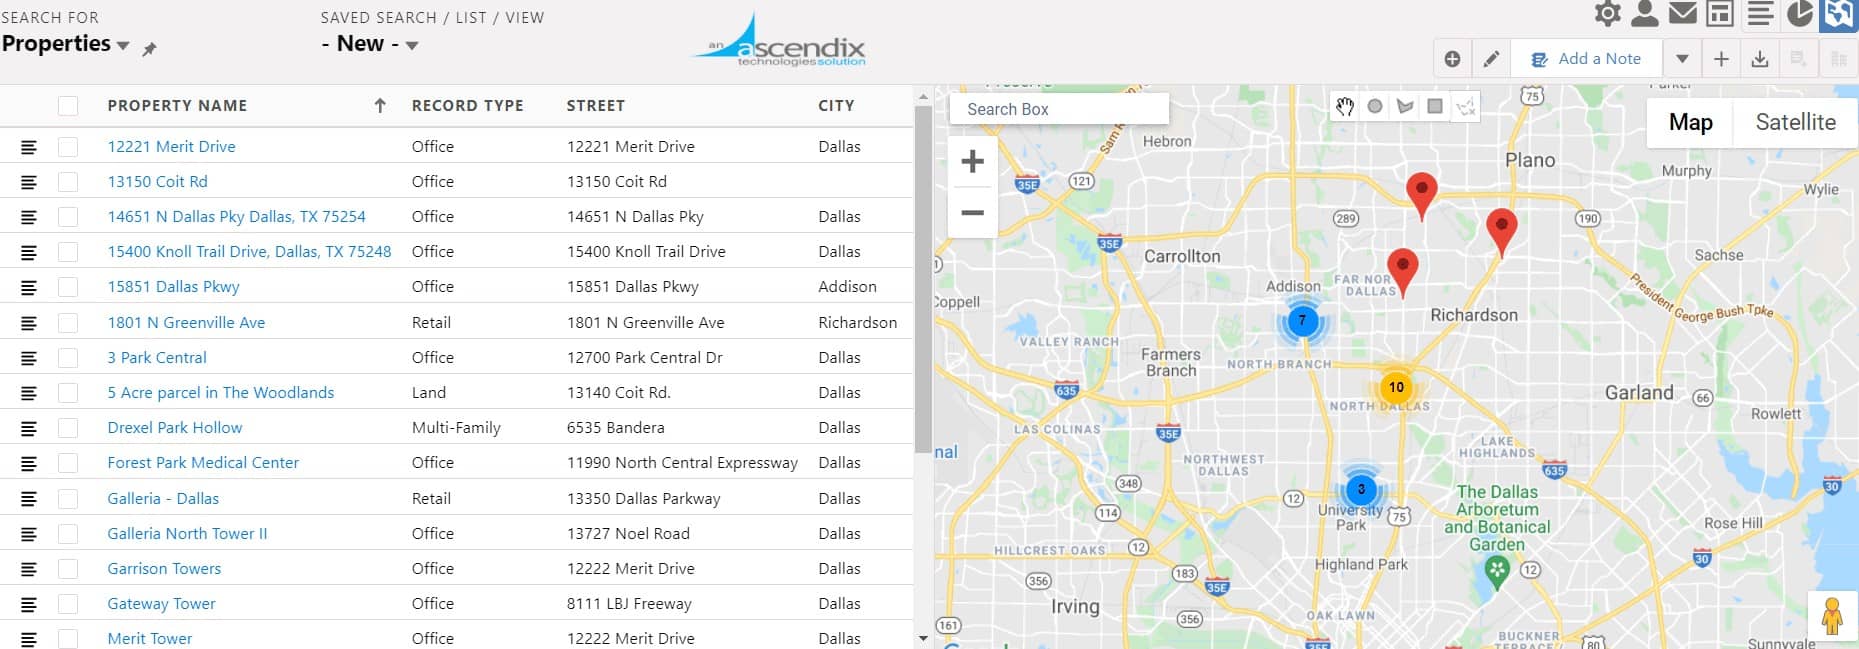 Radius search for Properties 5 miles from the Contact